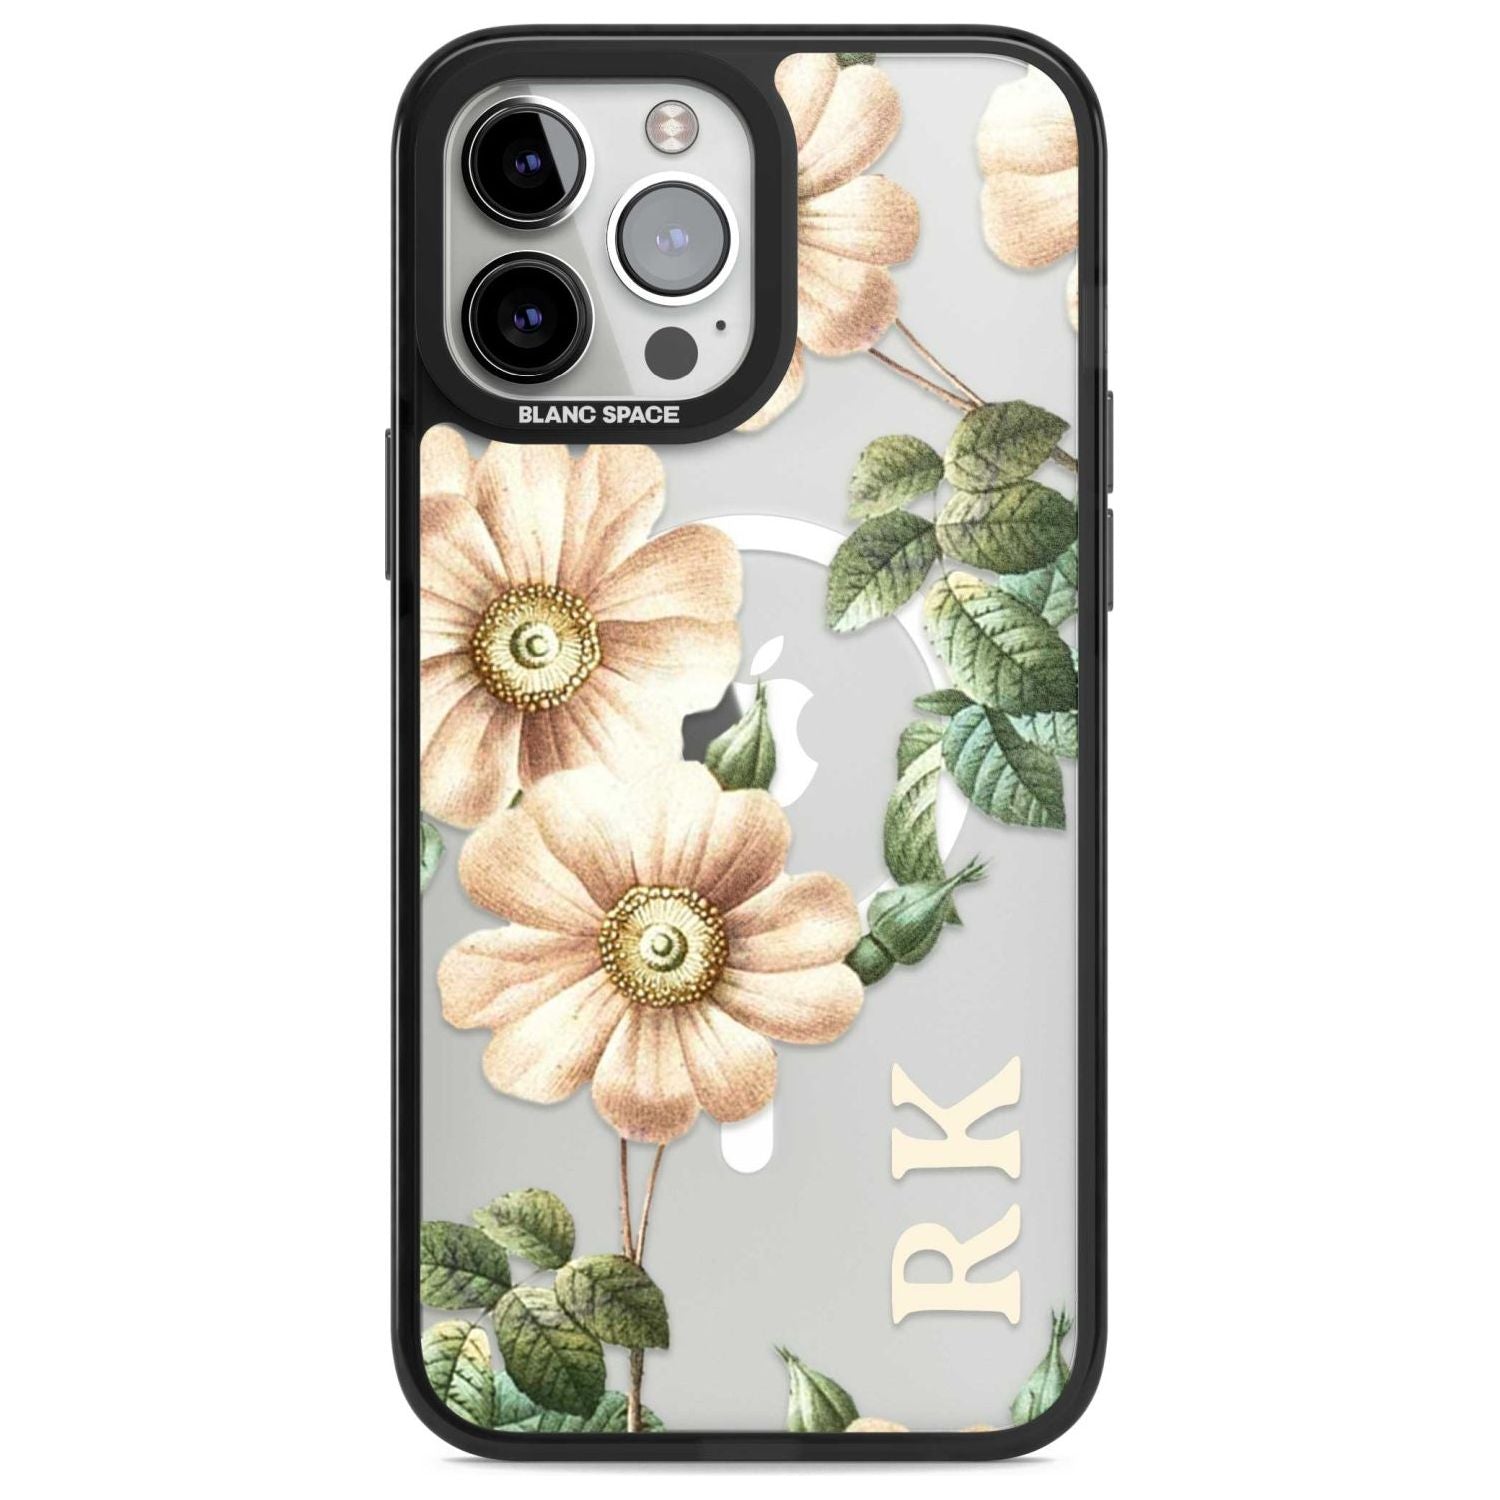 Personalised Clear Vintage Floral Cream Anemones Custom Phone Case iPhone 13 Pro Max / Magsafe Black Impact Case Blanc Space